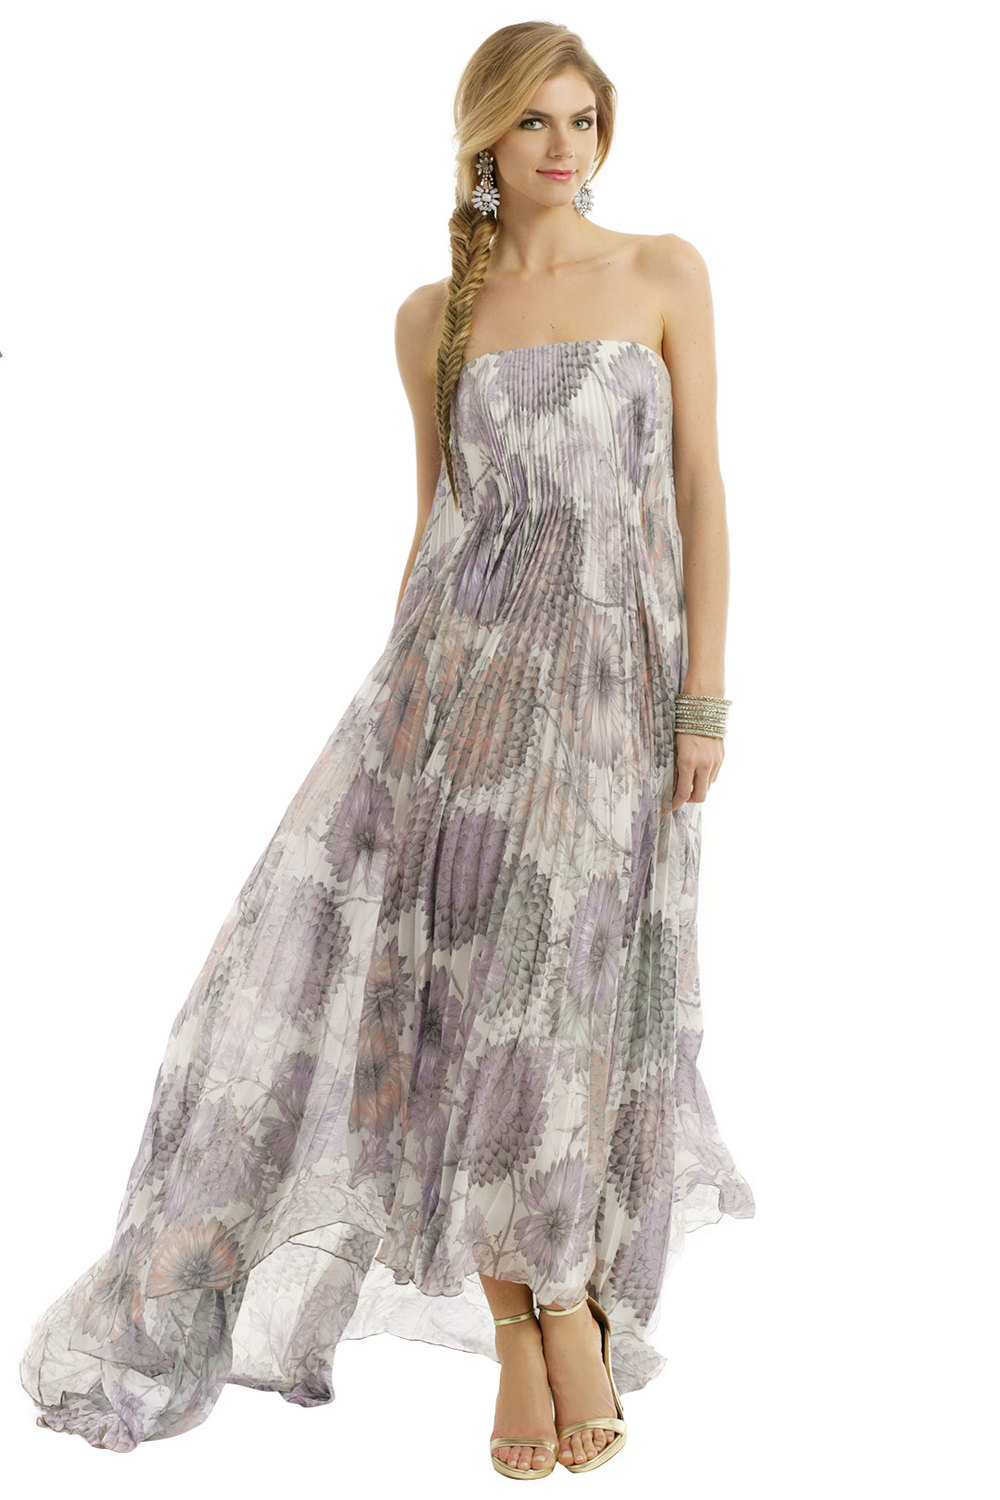  Heather floral printed maxi by Badgley Mischka. Rent the Runway. $160 rental.  